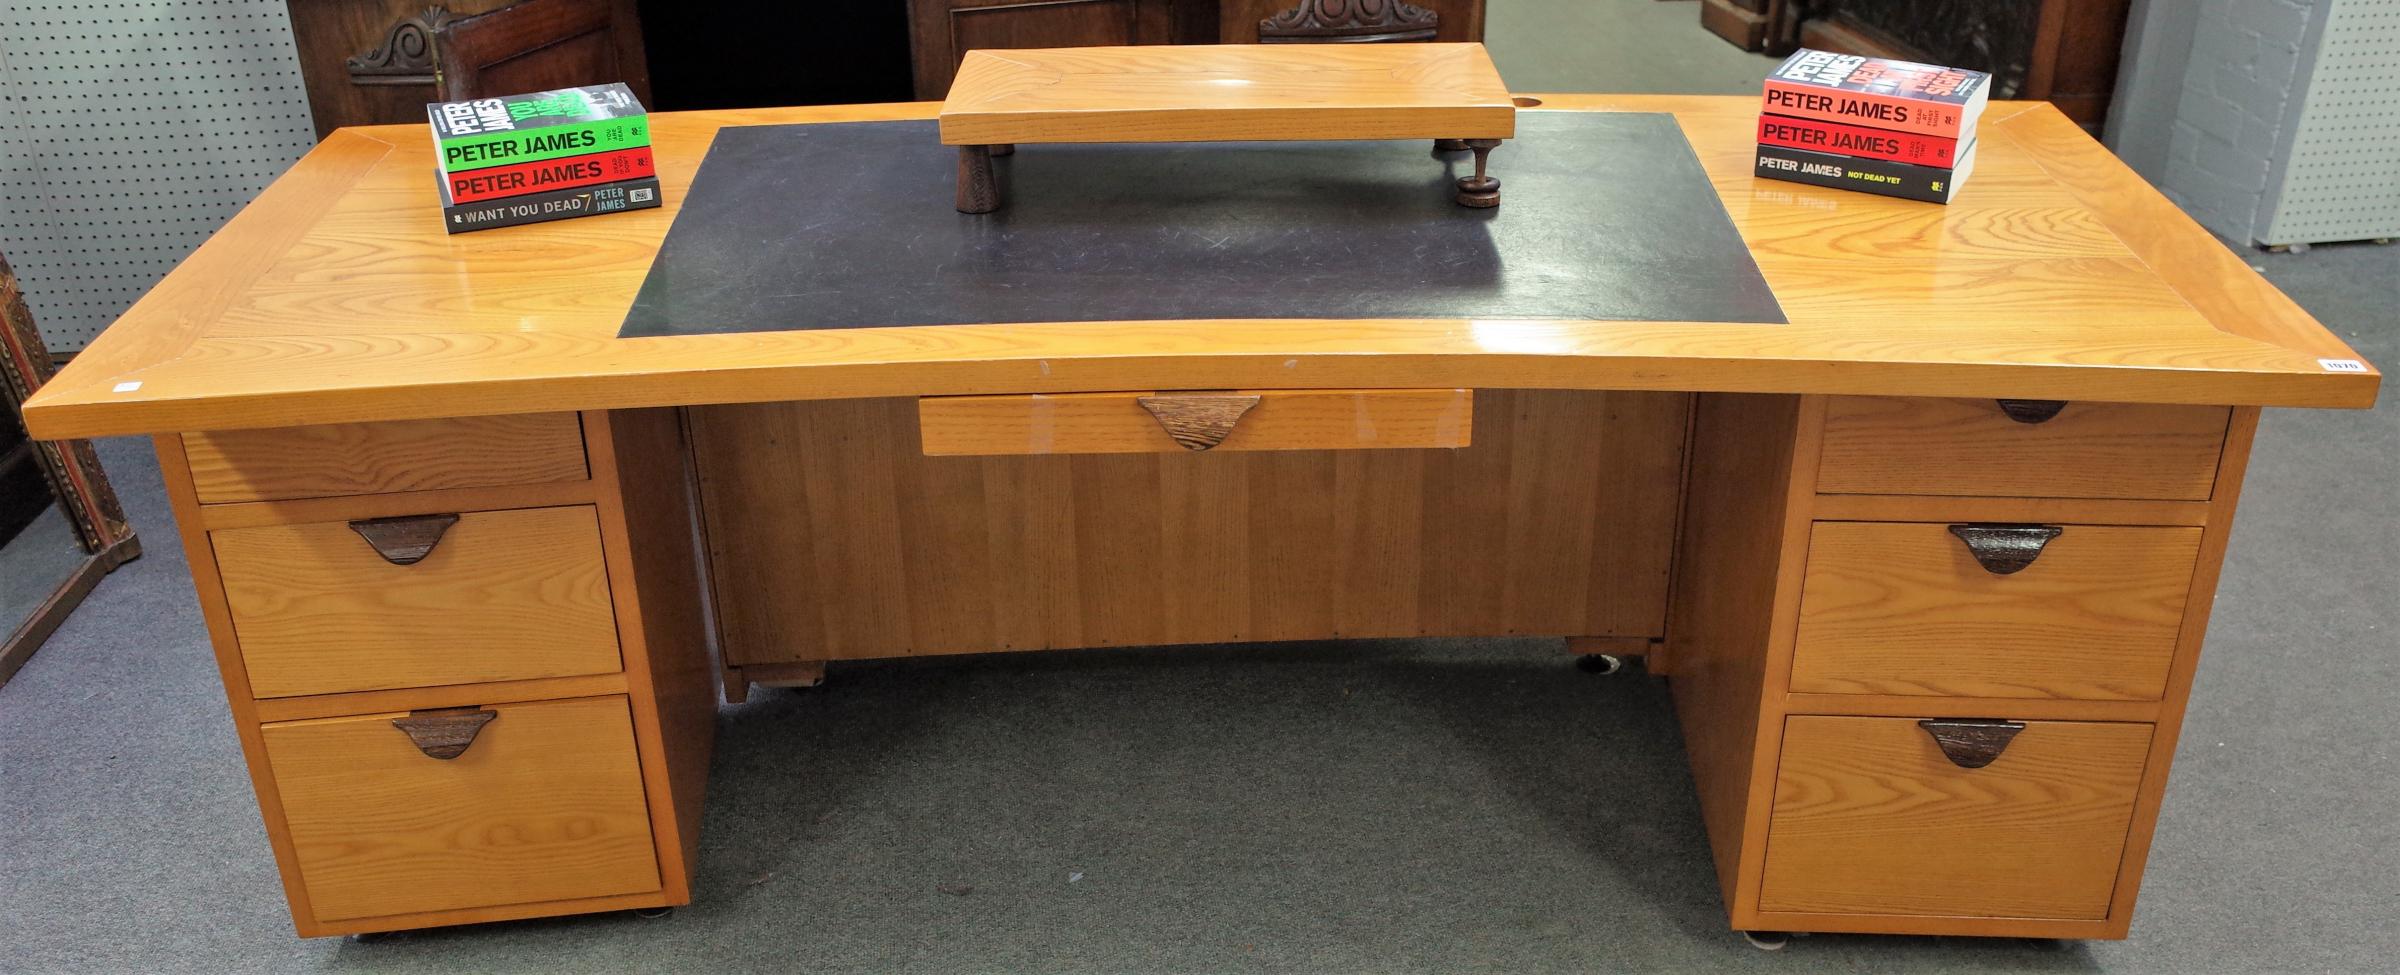 Author Peter James is selling the desk where he wrote many of his famed books in an auction